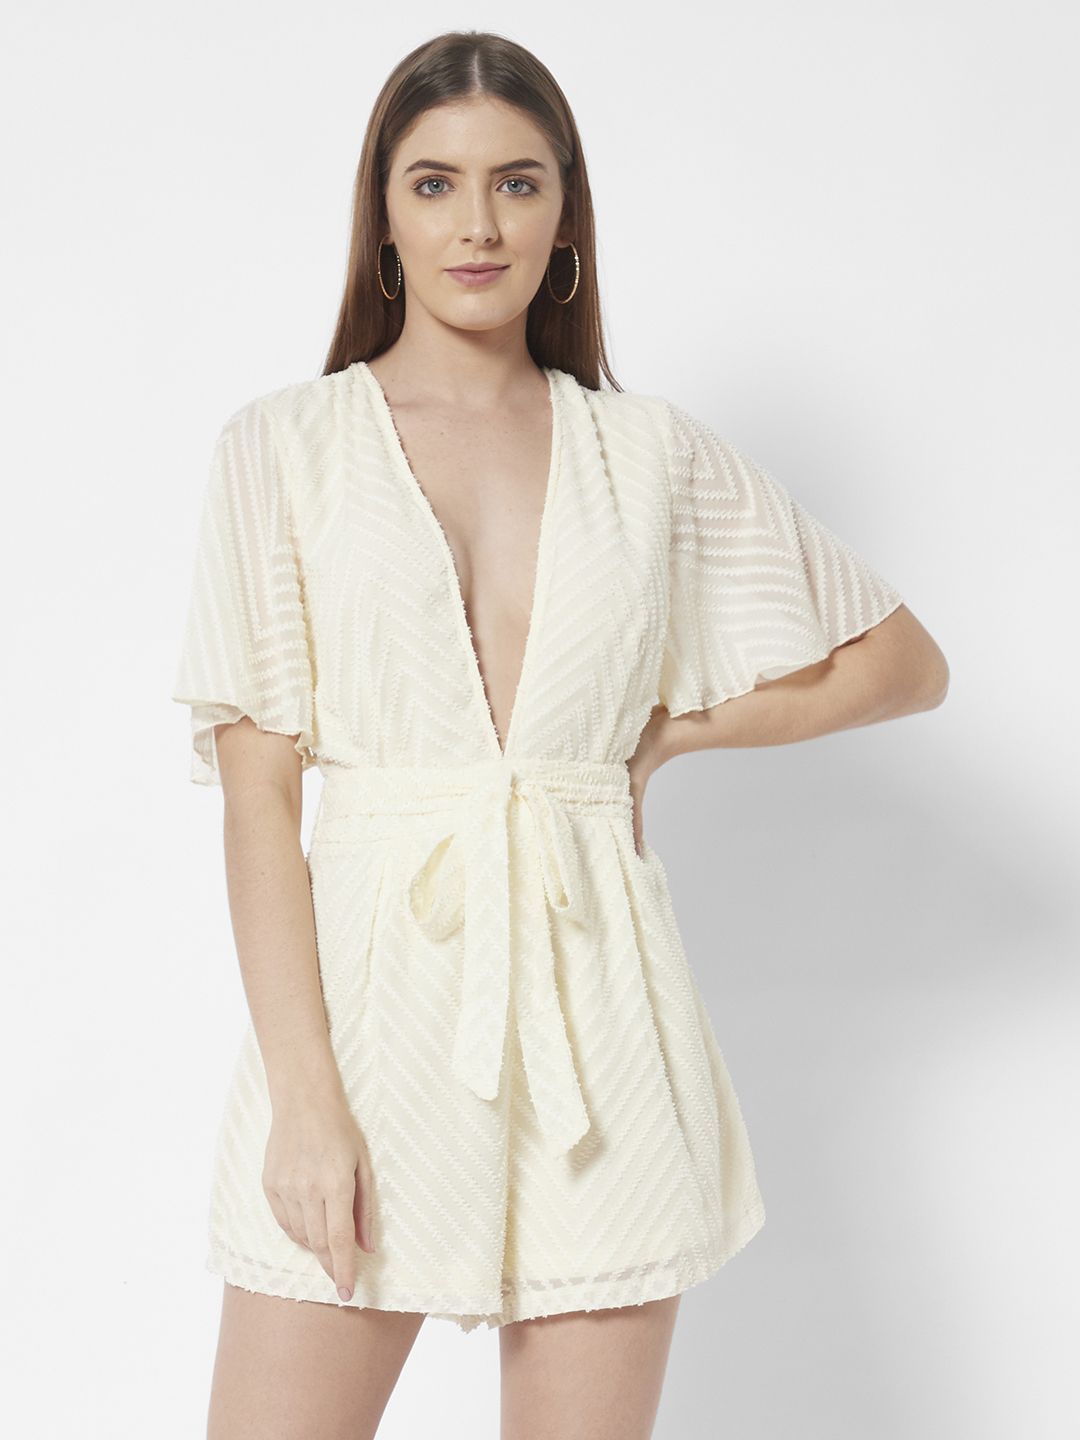 URBANIC Off White Self-Design Plunge V-Neck Playsuit with Belt Price in India